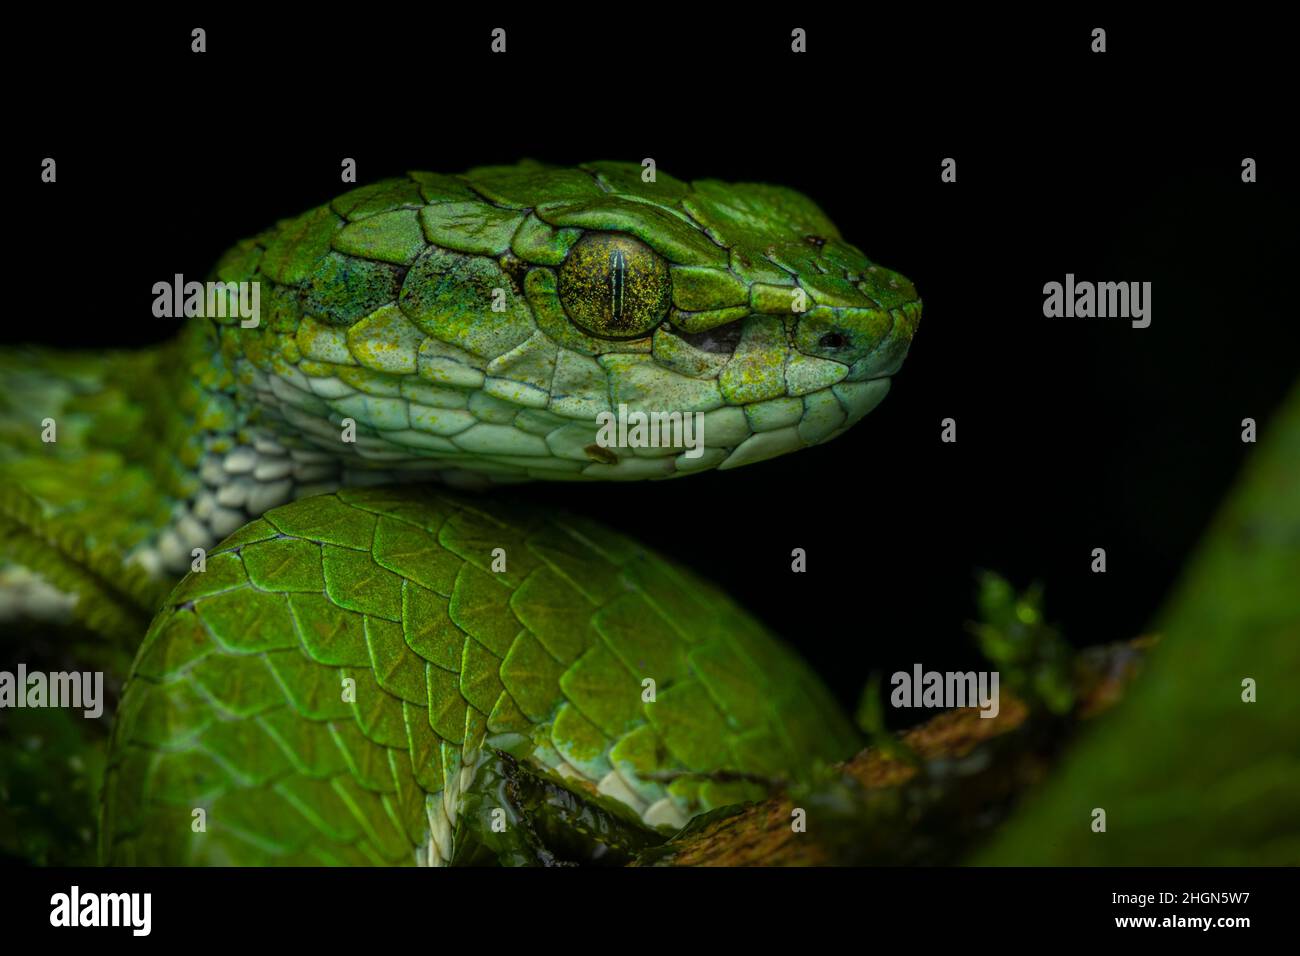 Professional close-up portrait of large-scaled pit viper from Munnar, Kerala, India with a black background with diffused lighting and no glare. Stock Photo